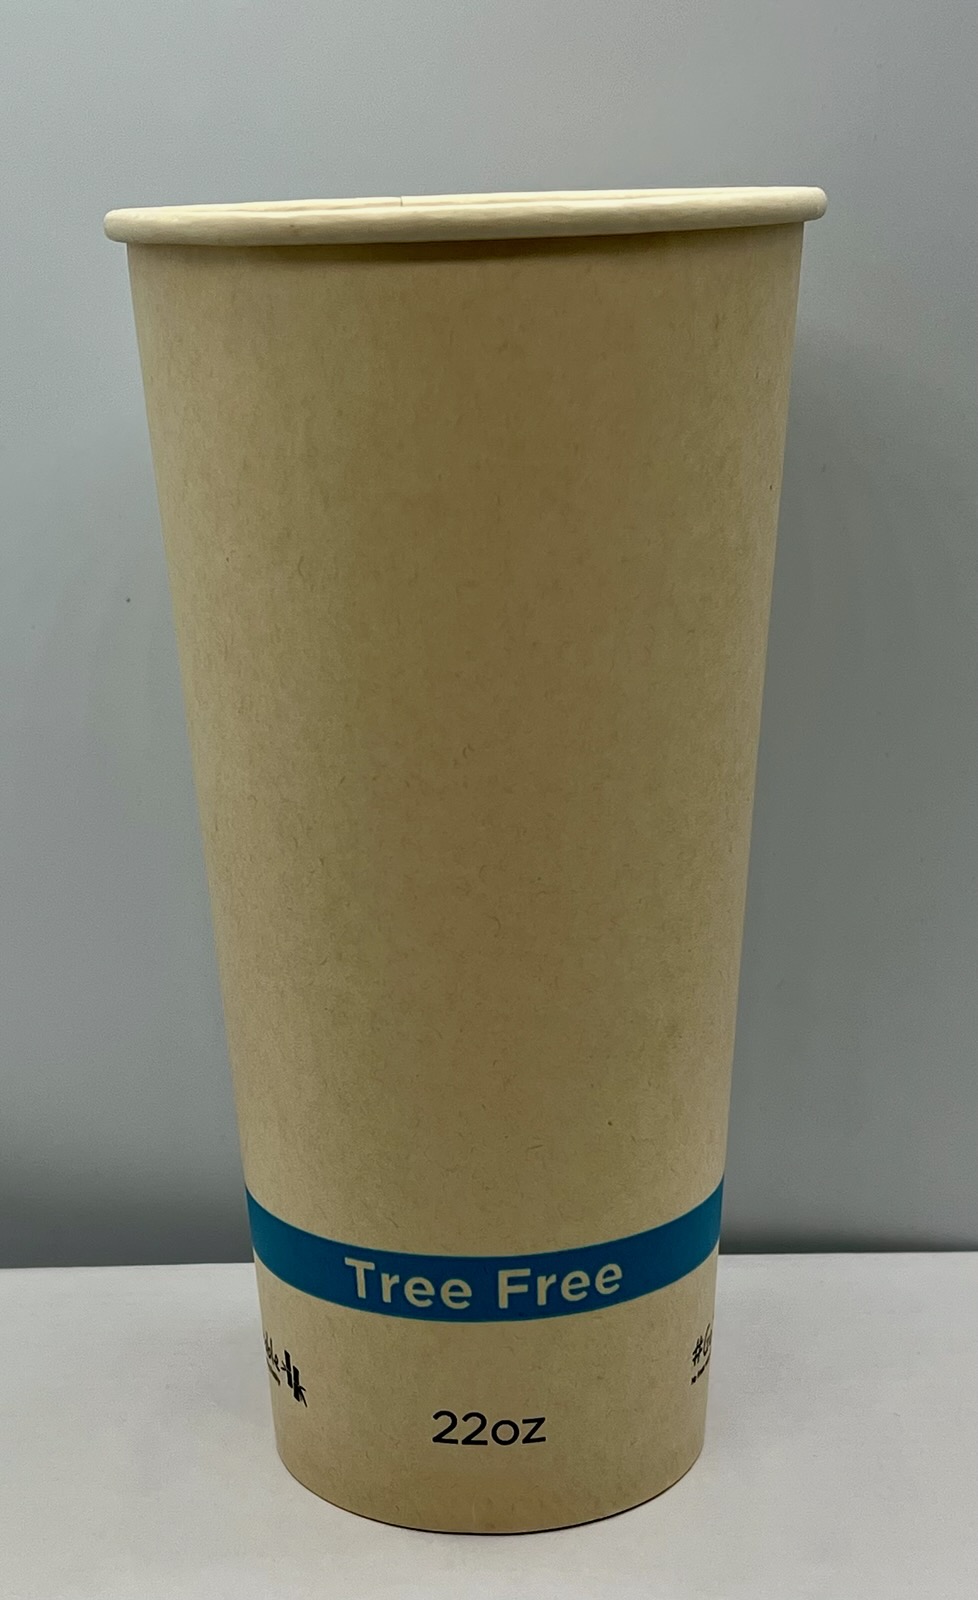 Product 1079205: CUP PAP COLD PLA 22Z TF 1M  TFCC22